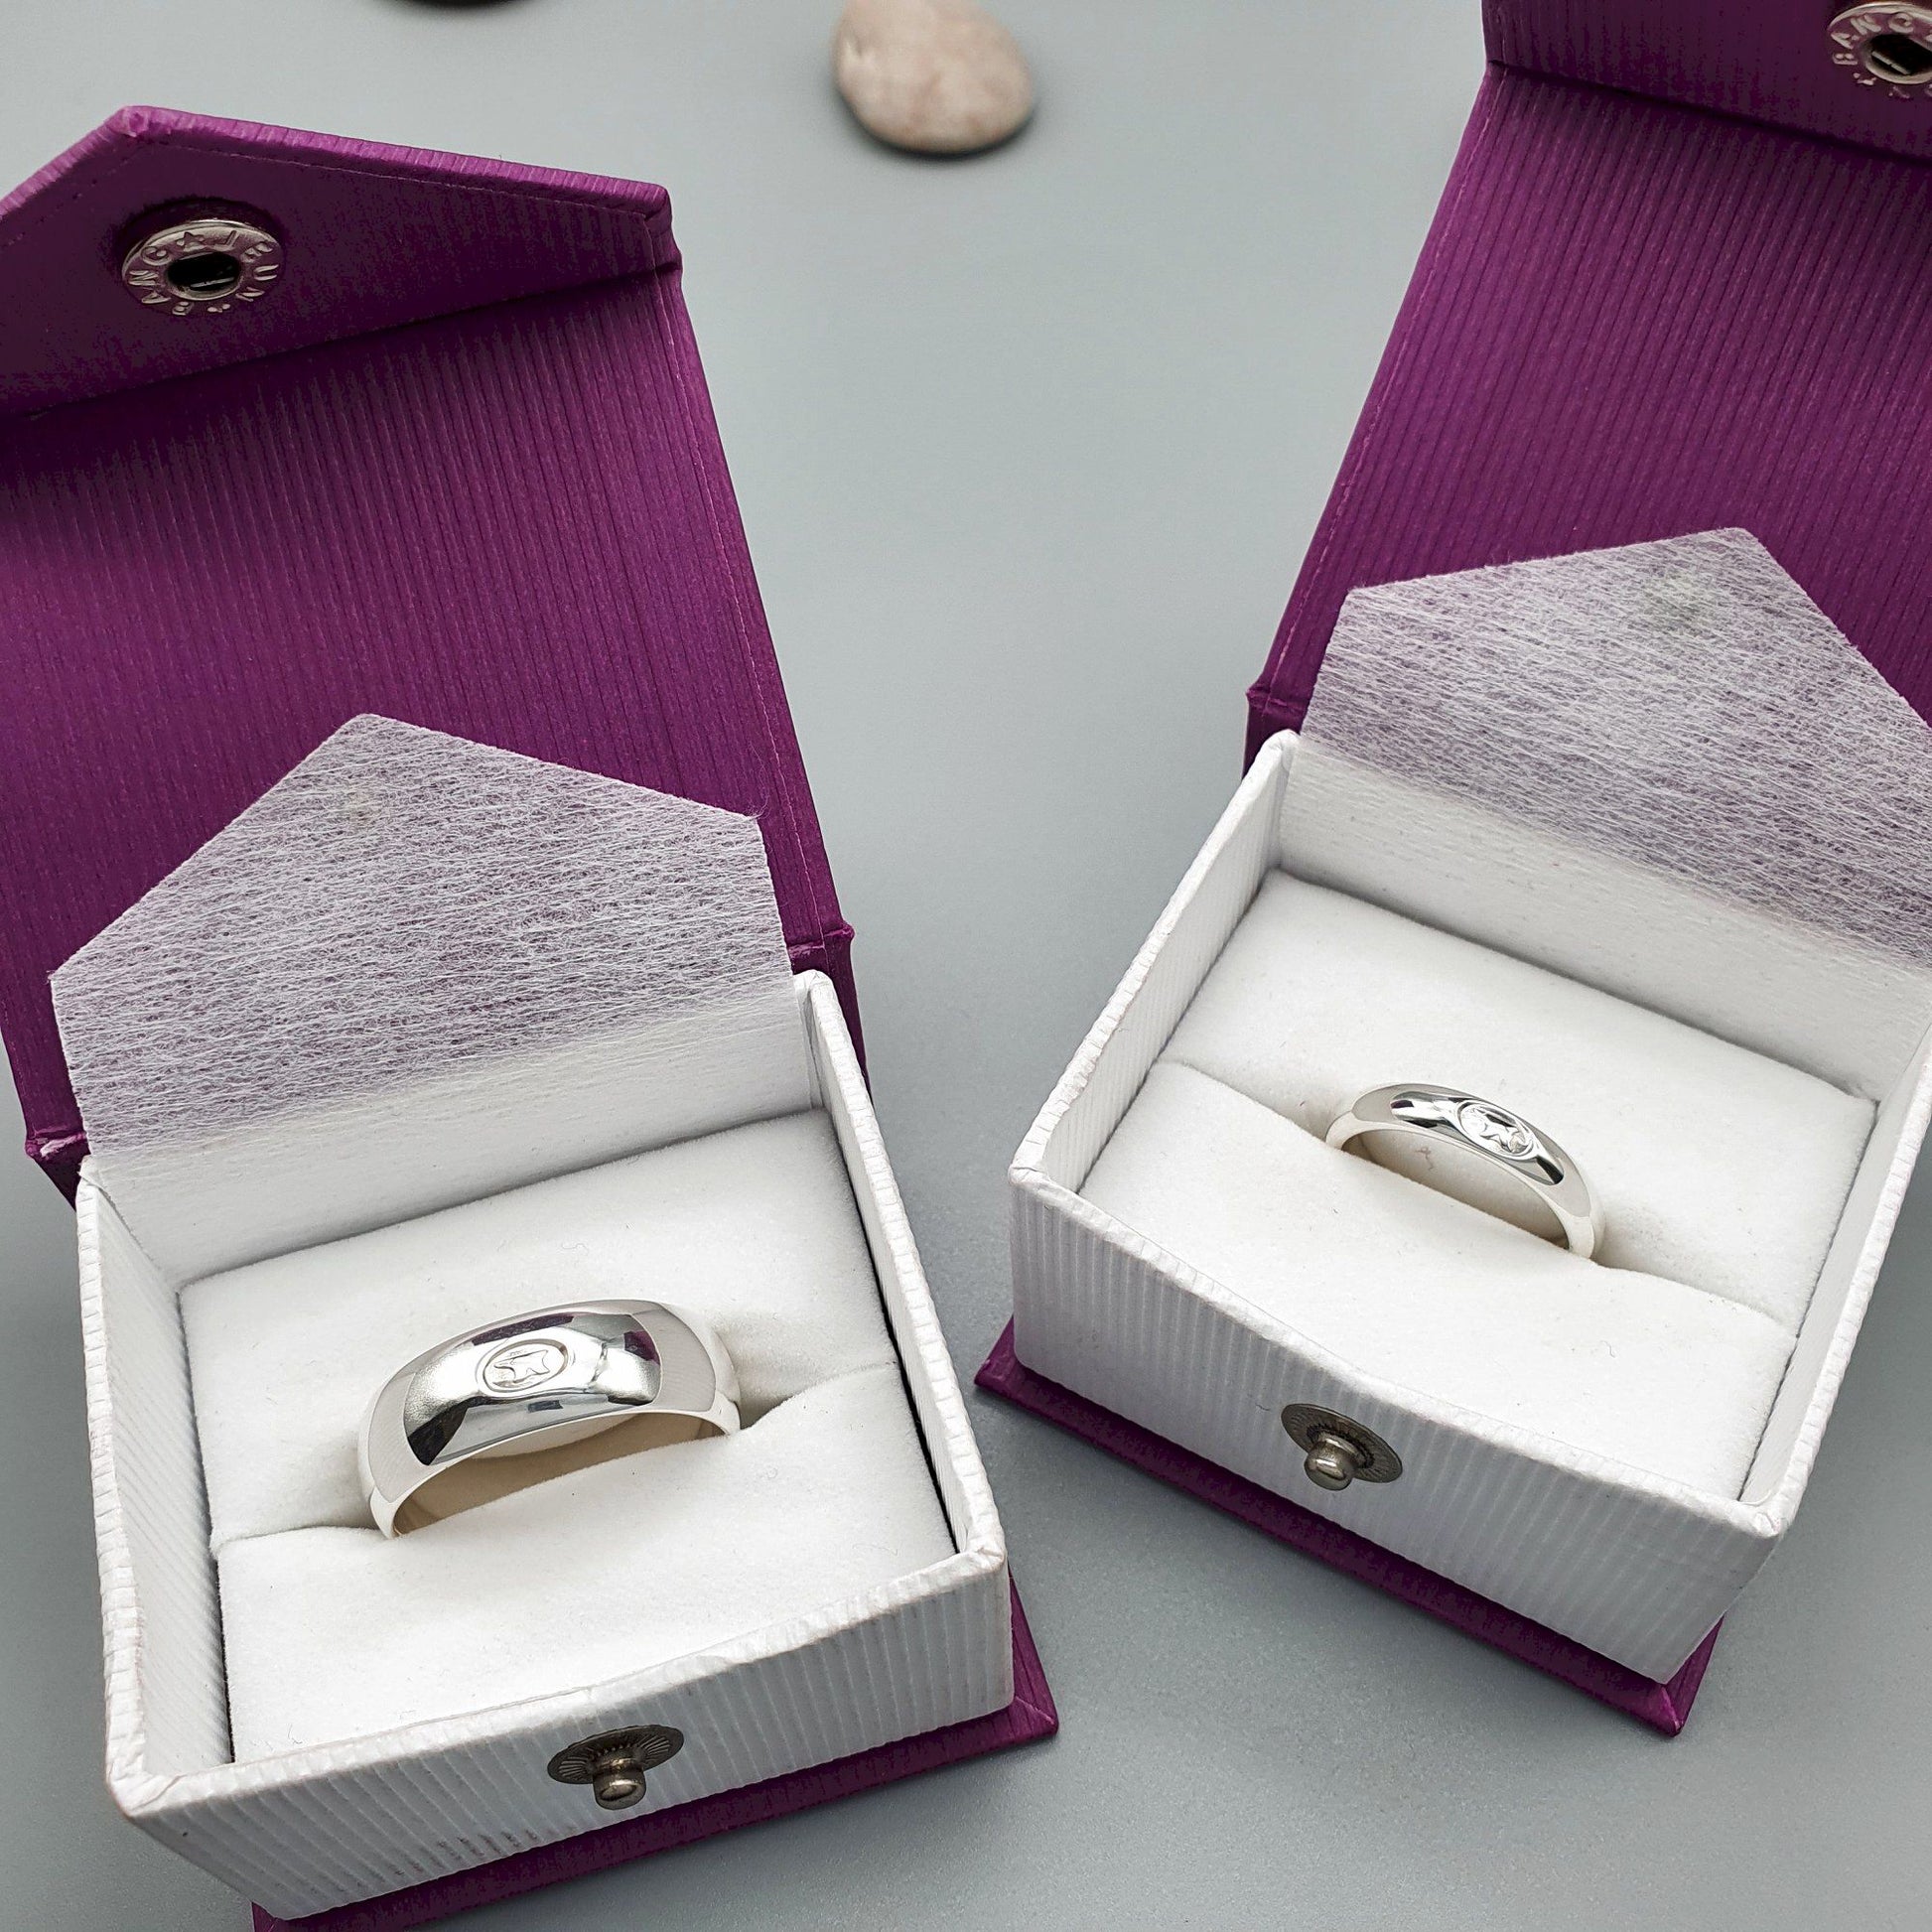 Anvil his and hers wide silver matching Gretna Green ring set, 4mm and 8mm - Gretna Green Wedding Rings